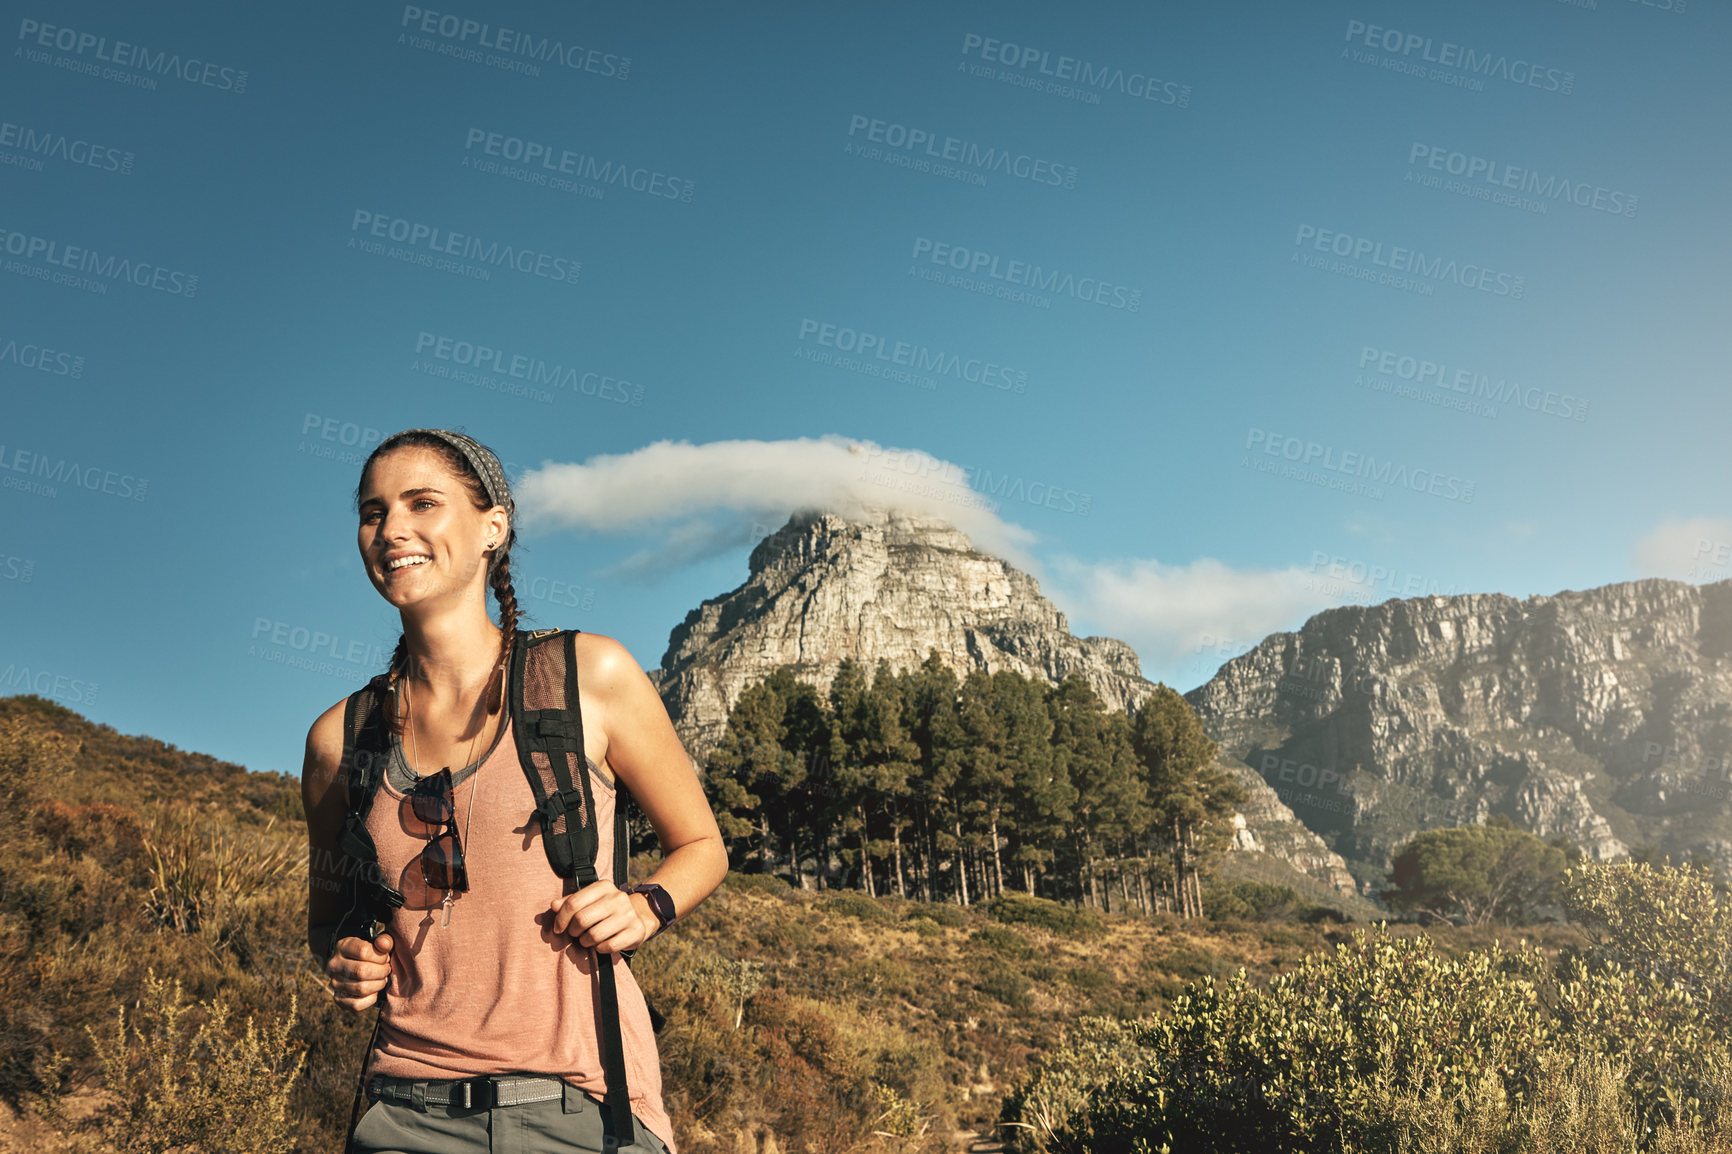 Buy stock photo Shot of a young woman out on a hike through the mountains